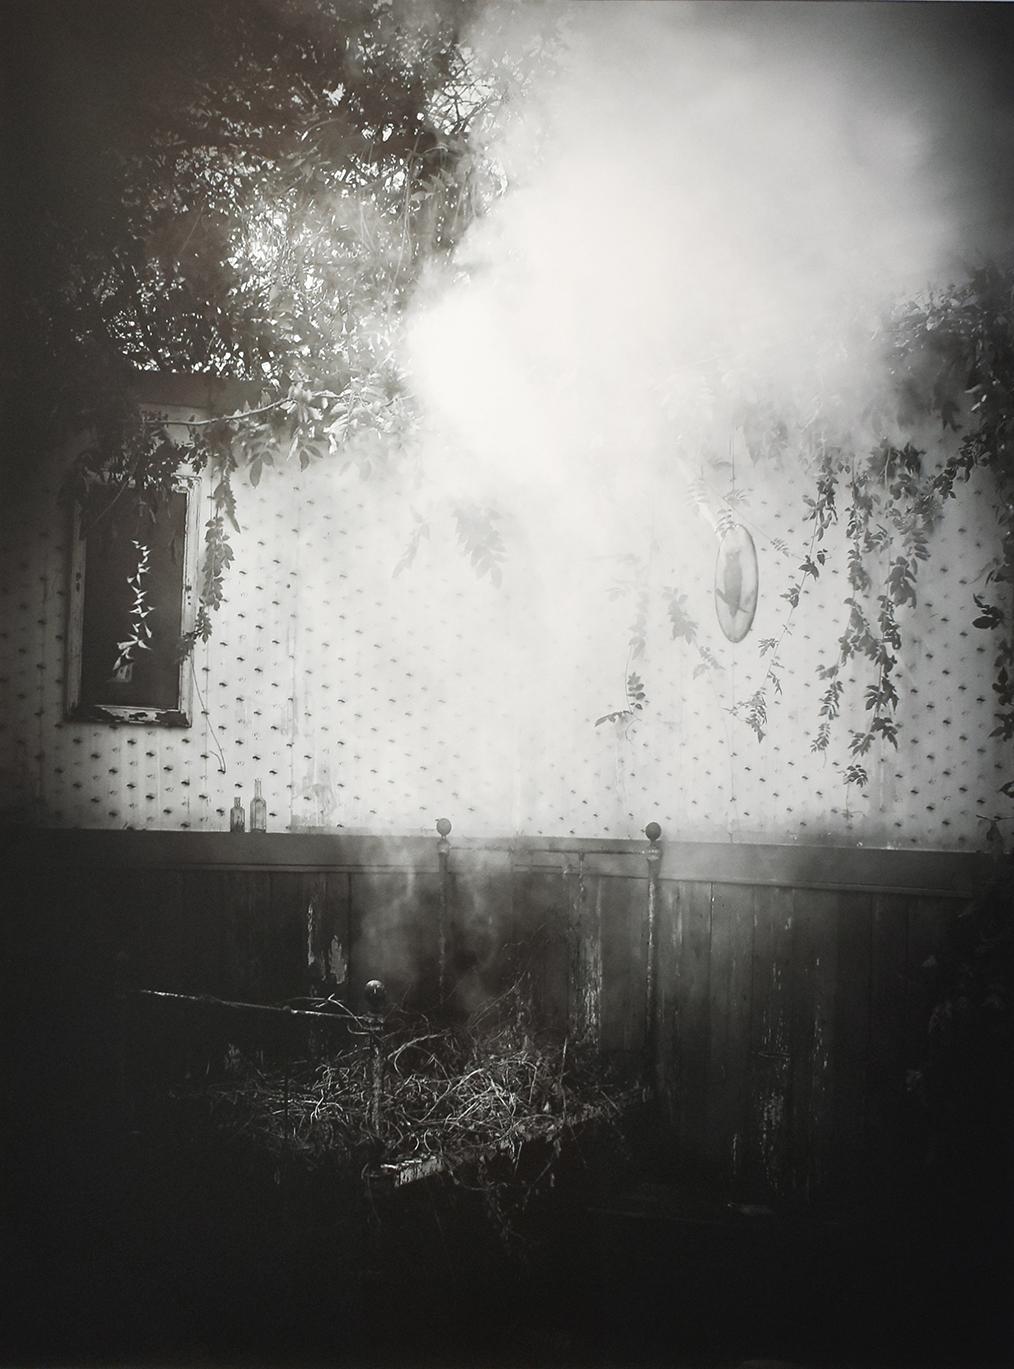 Robert Hite Black and White Photograph - After the Smoke: Modern Black & White Photograph of an Old-Fashioned Interior